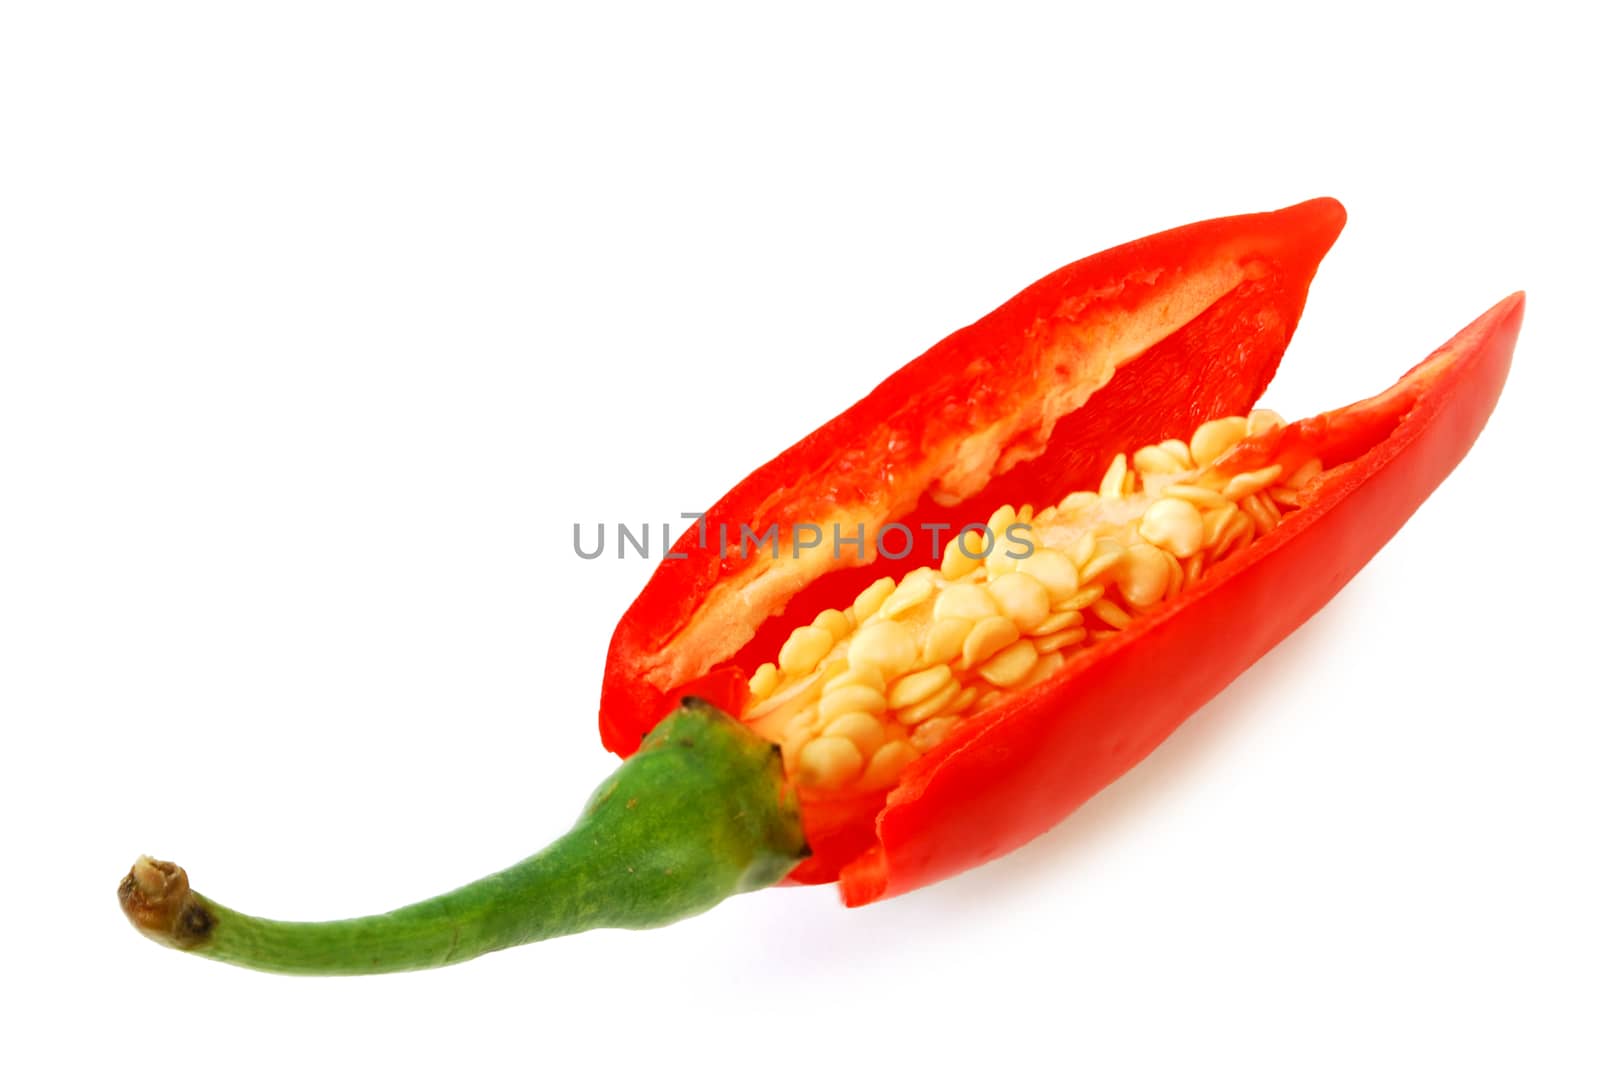 Capsicum frutescens L. Chilli Pepper.Chili has anti-oxidants, helps slow down aging.With Clipping Path